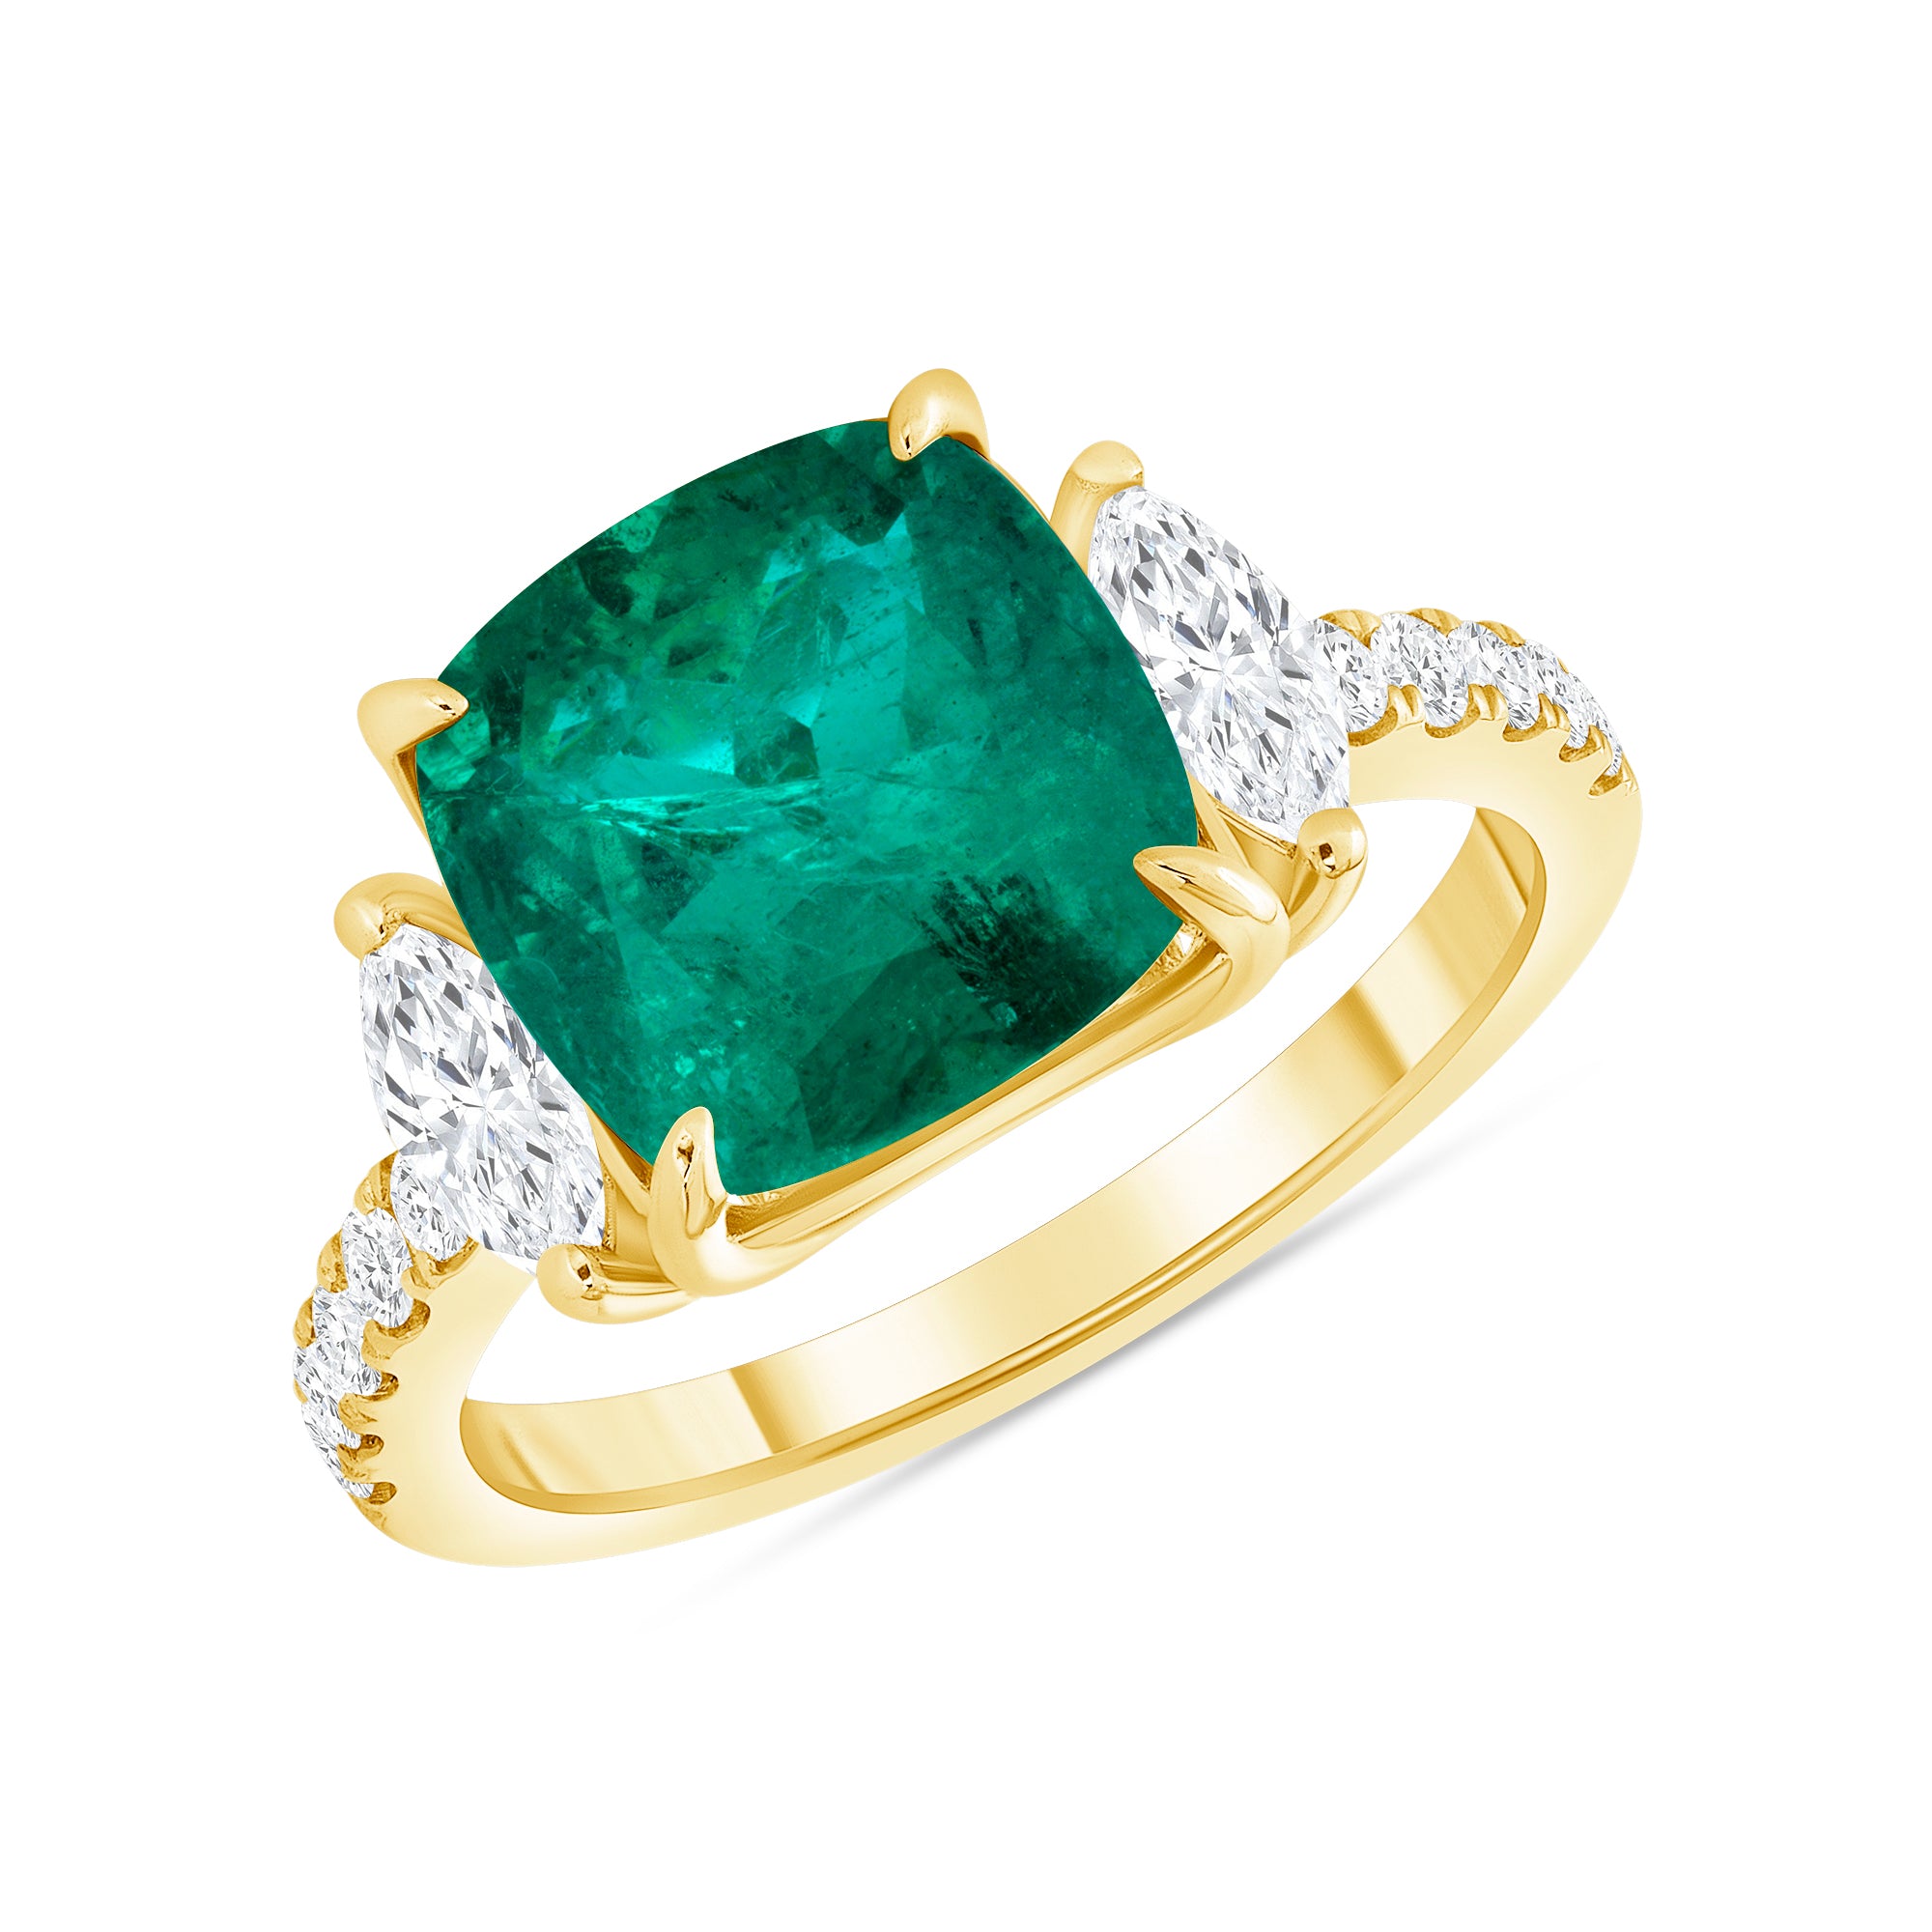 3.69 Ct. Cushion-Cut Colombian Emerald Solitaire Ring with 0.65 Ct. Diamond Accents 14k Yellow Gold